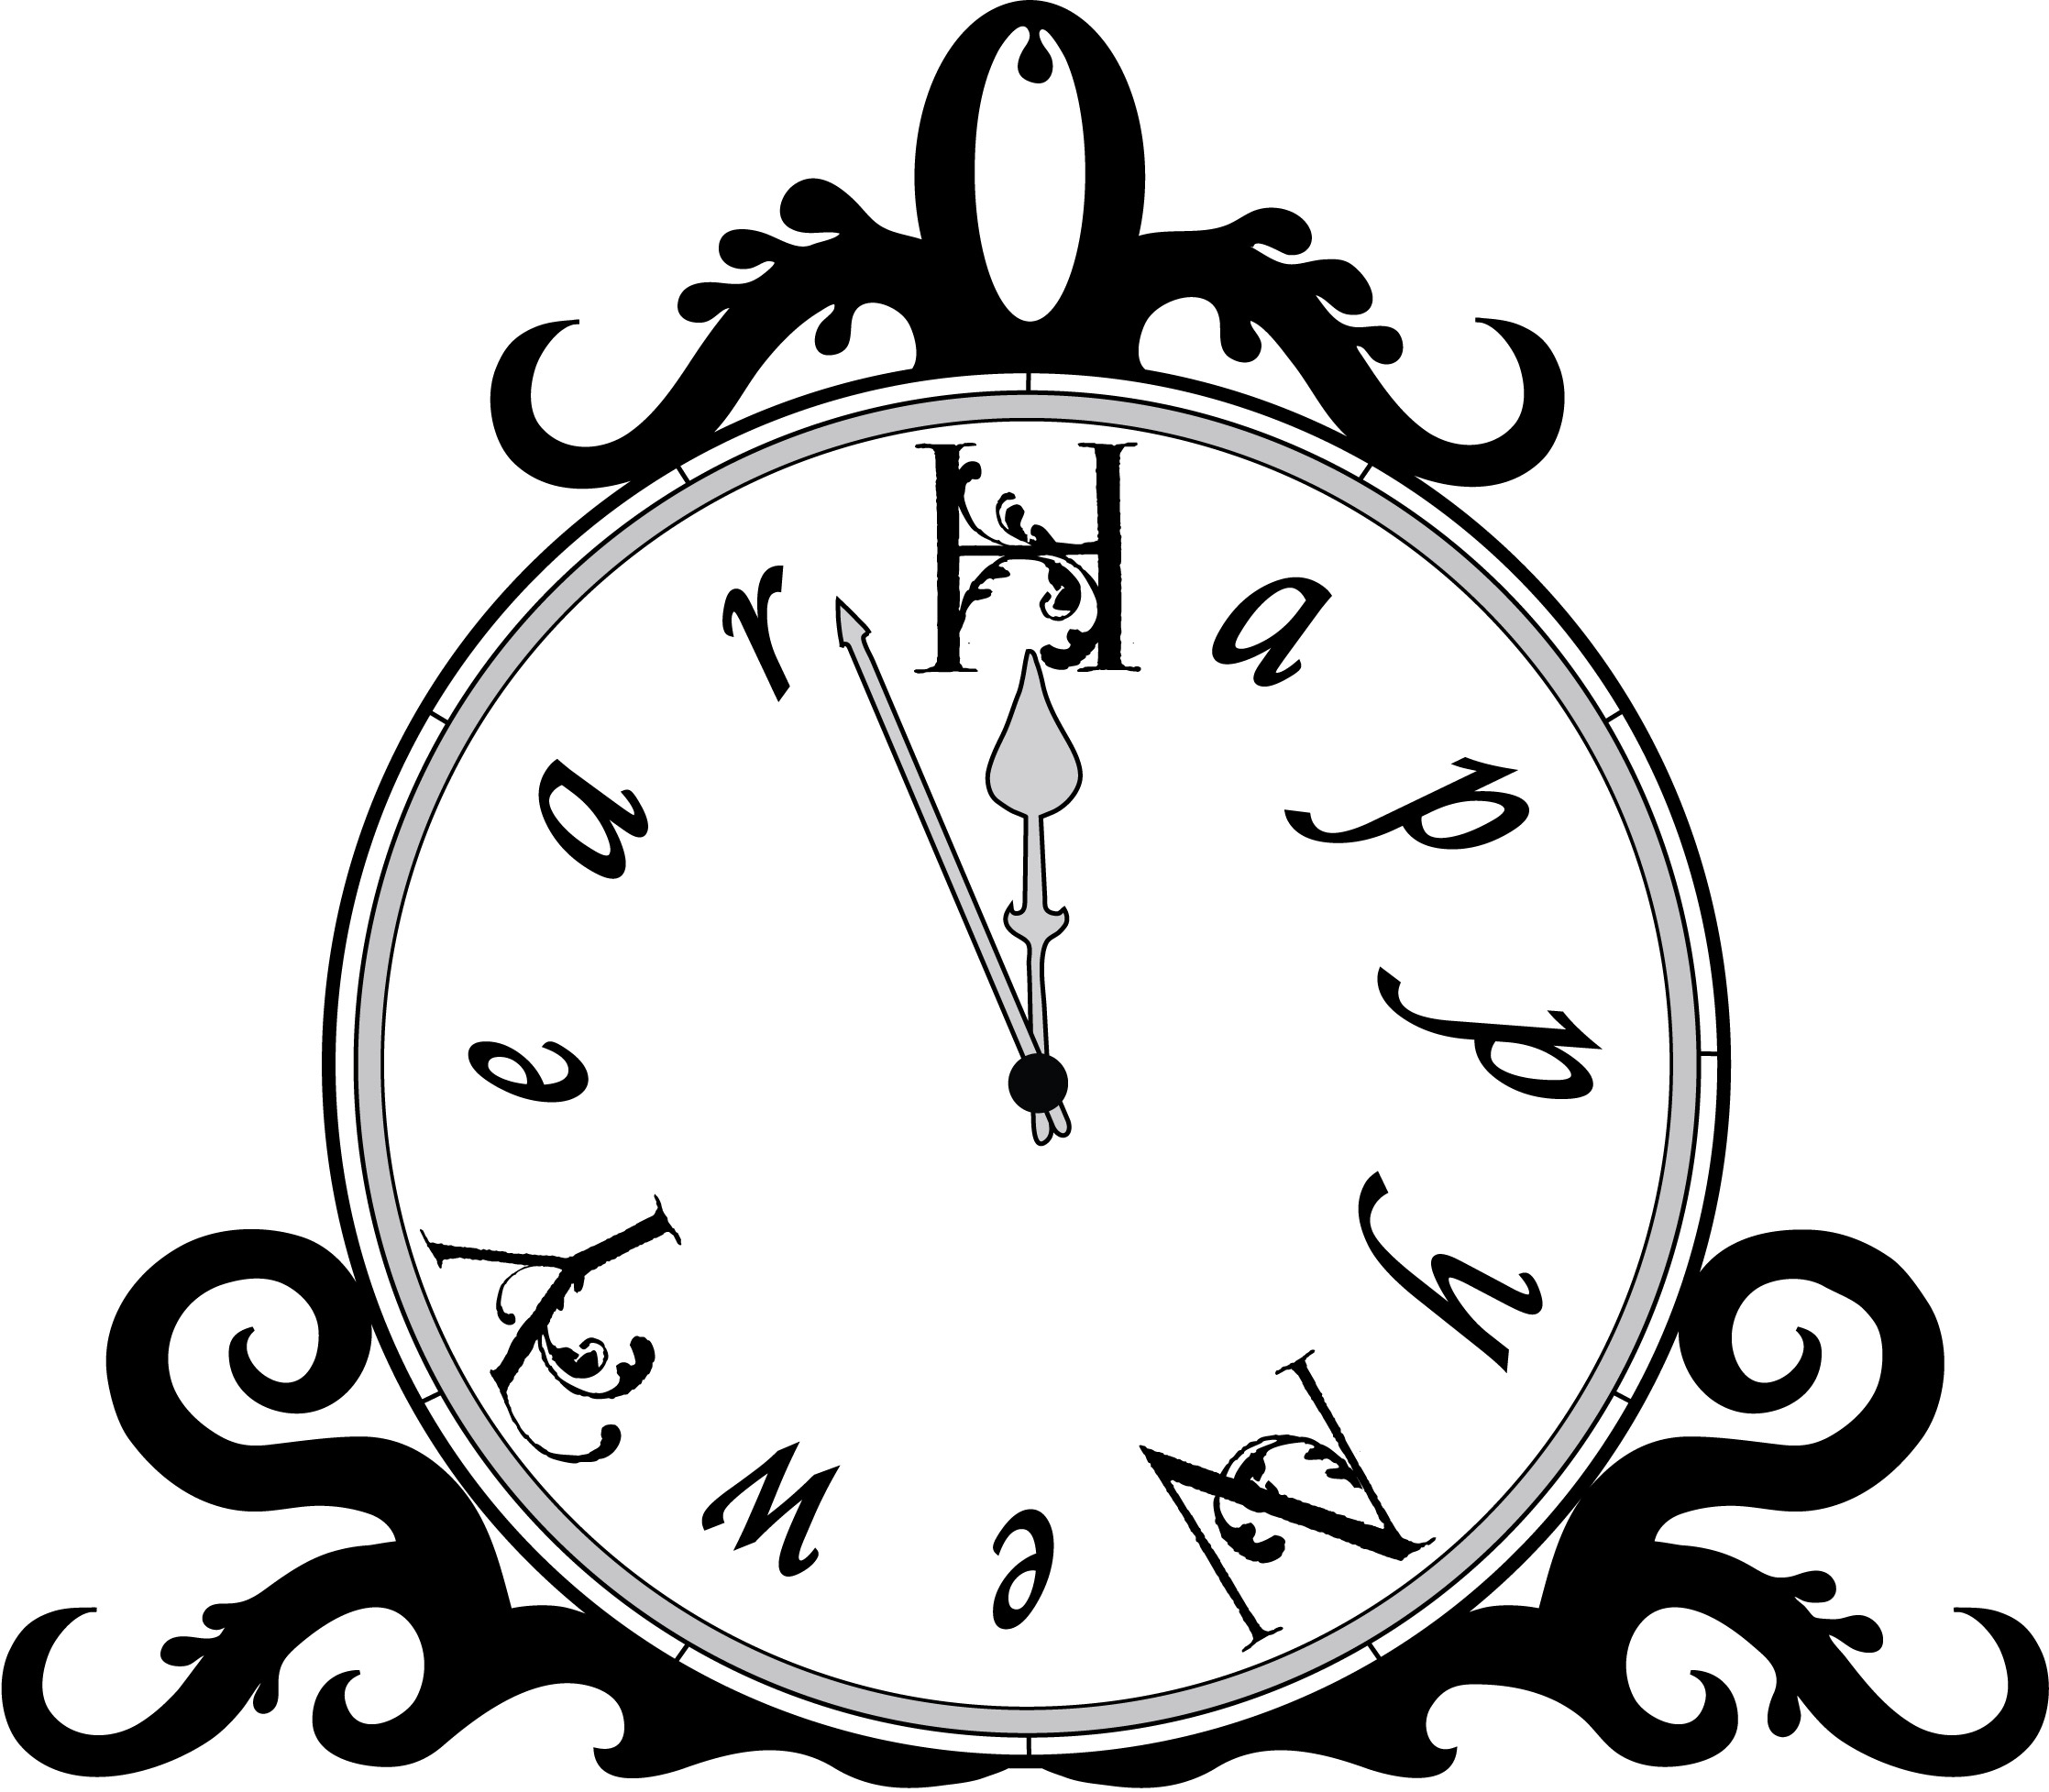 New year clock clipart black and white happy holidays